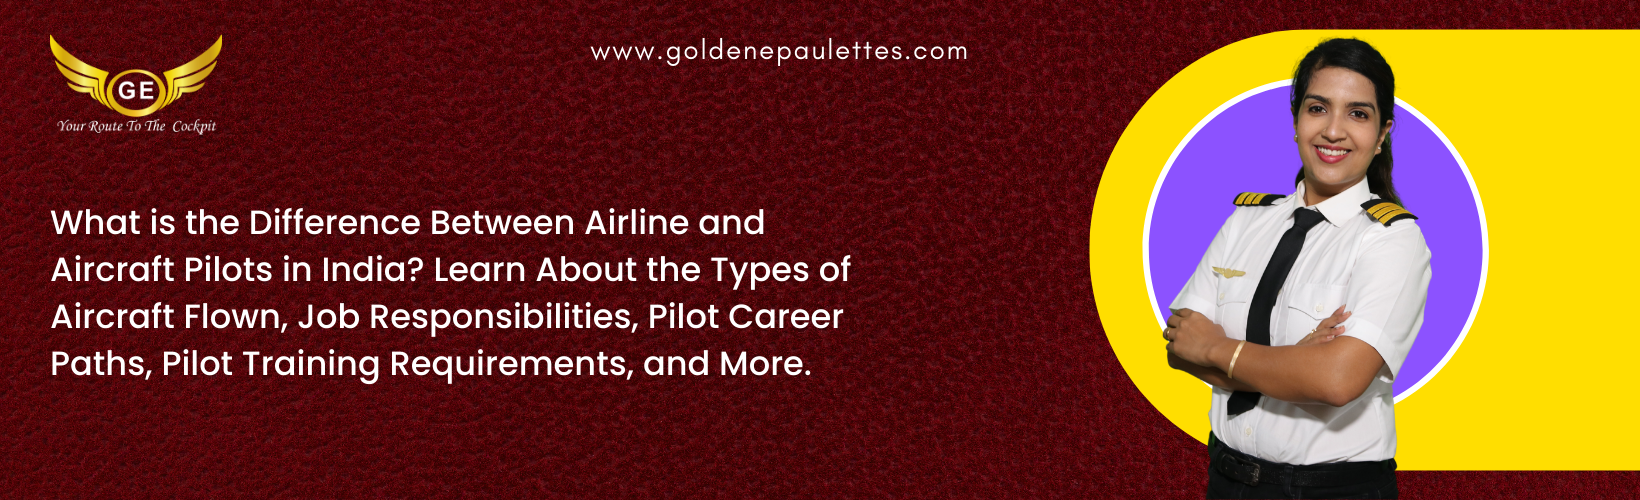 What is the Difference Between Airline and Aircraft Pilots in India